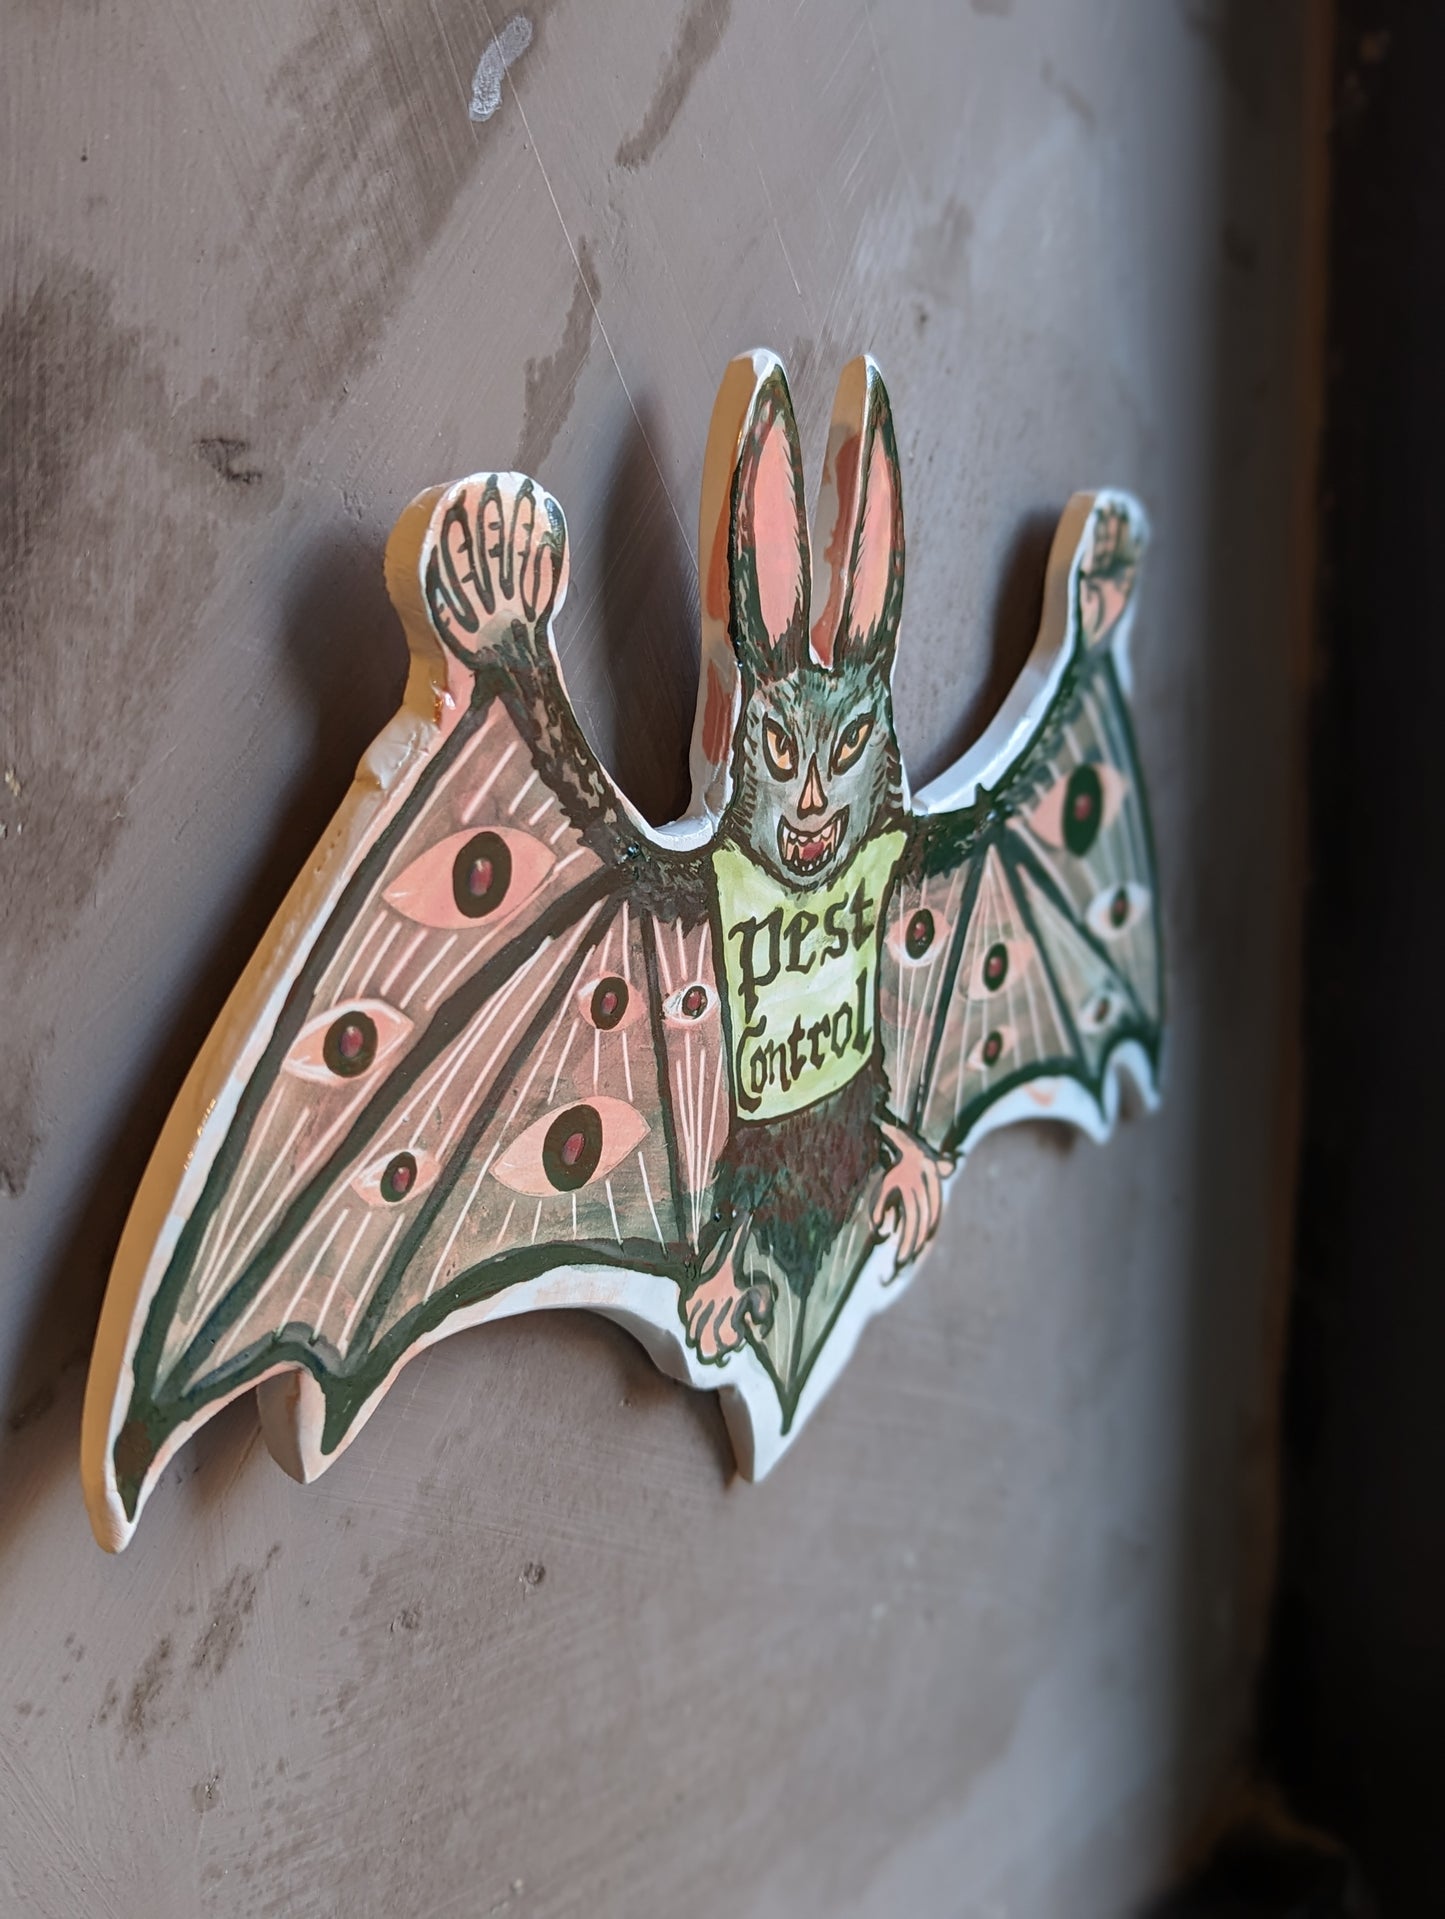 "Pest Control" Wall Plaque by Ciara Veronica Dunne